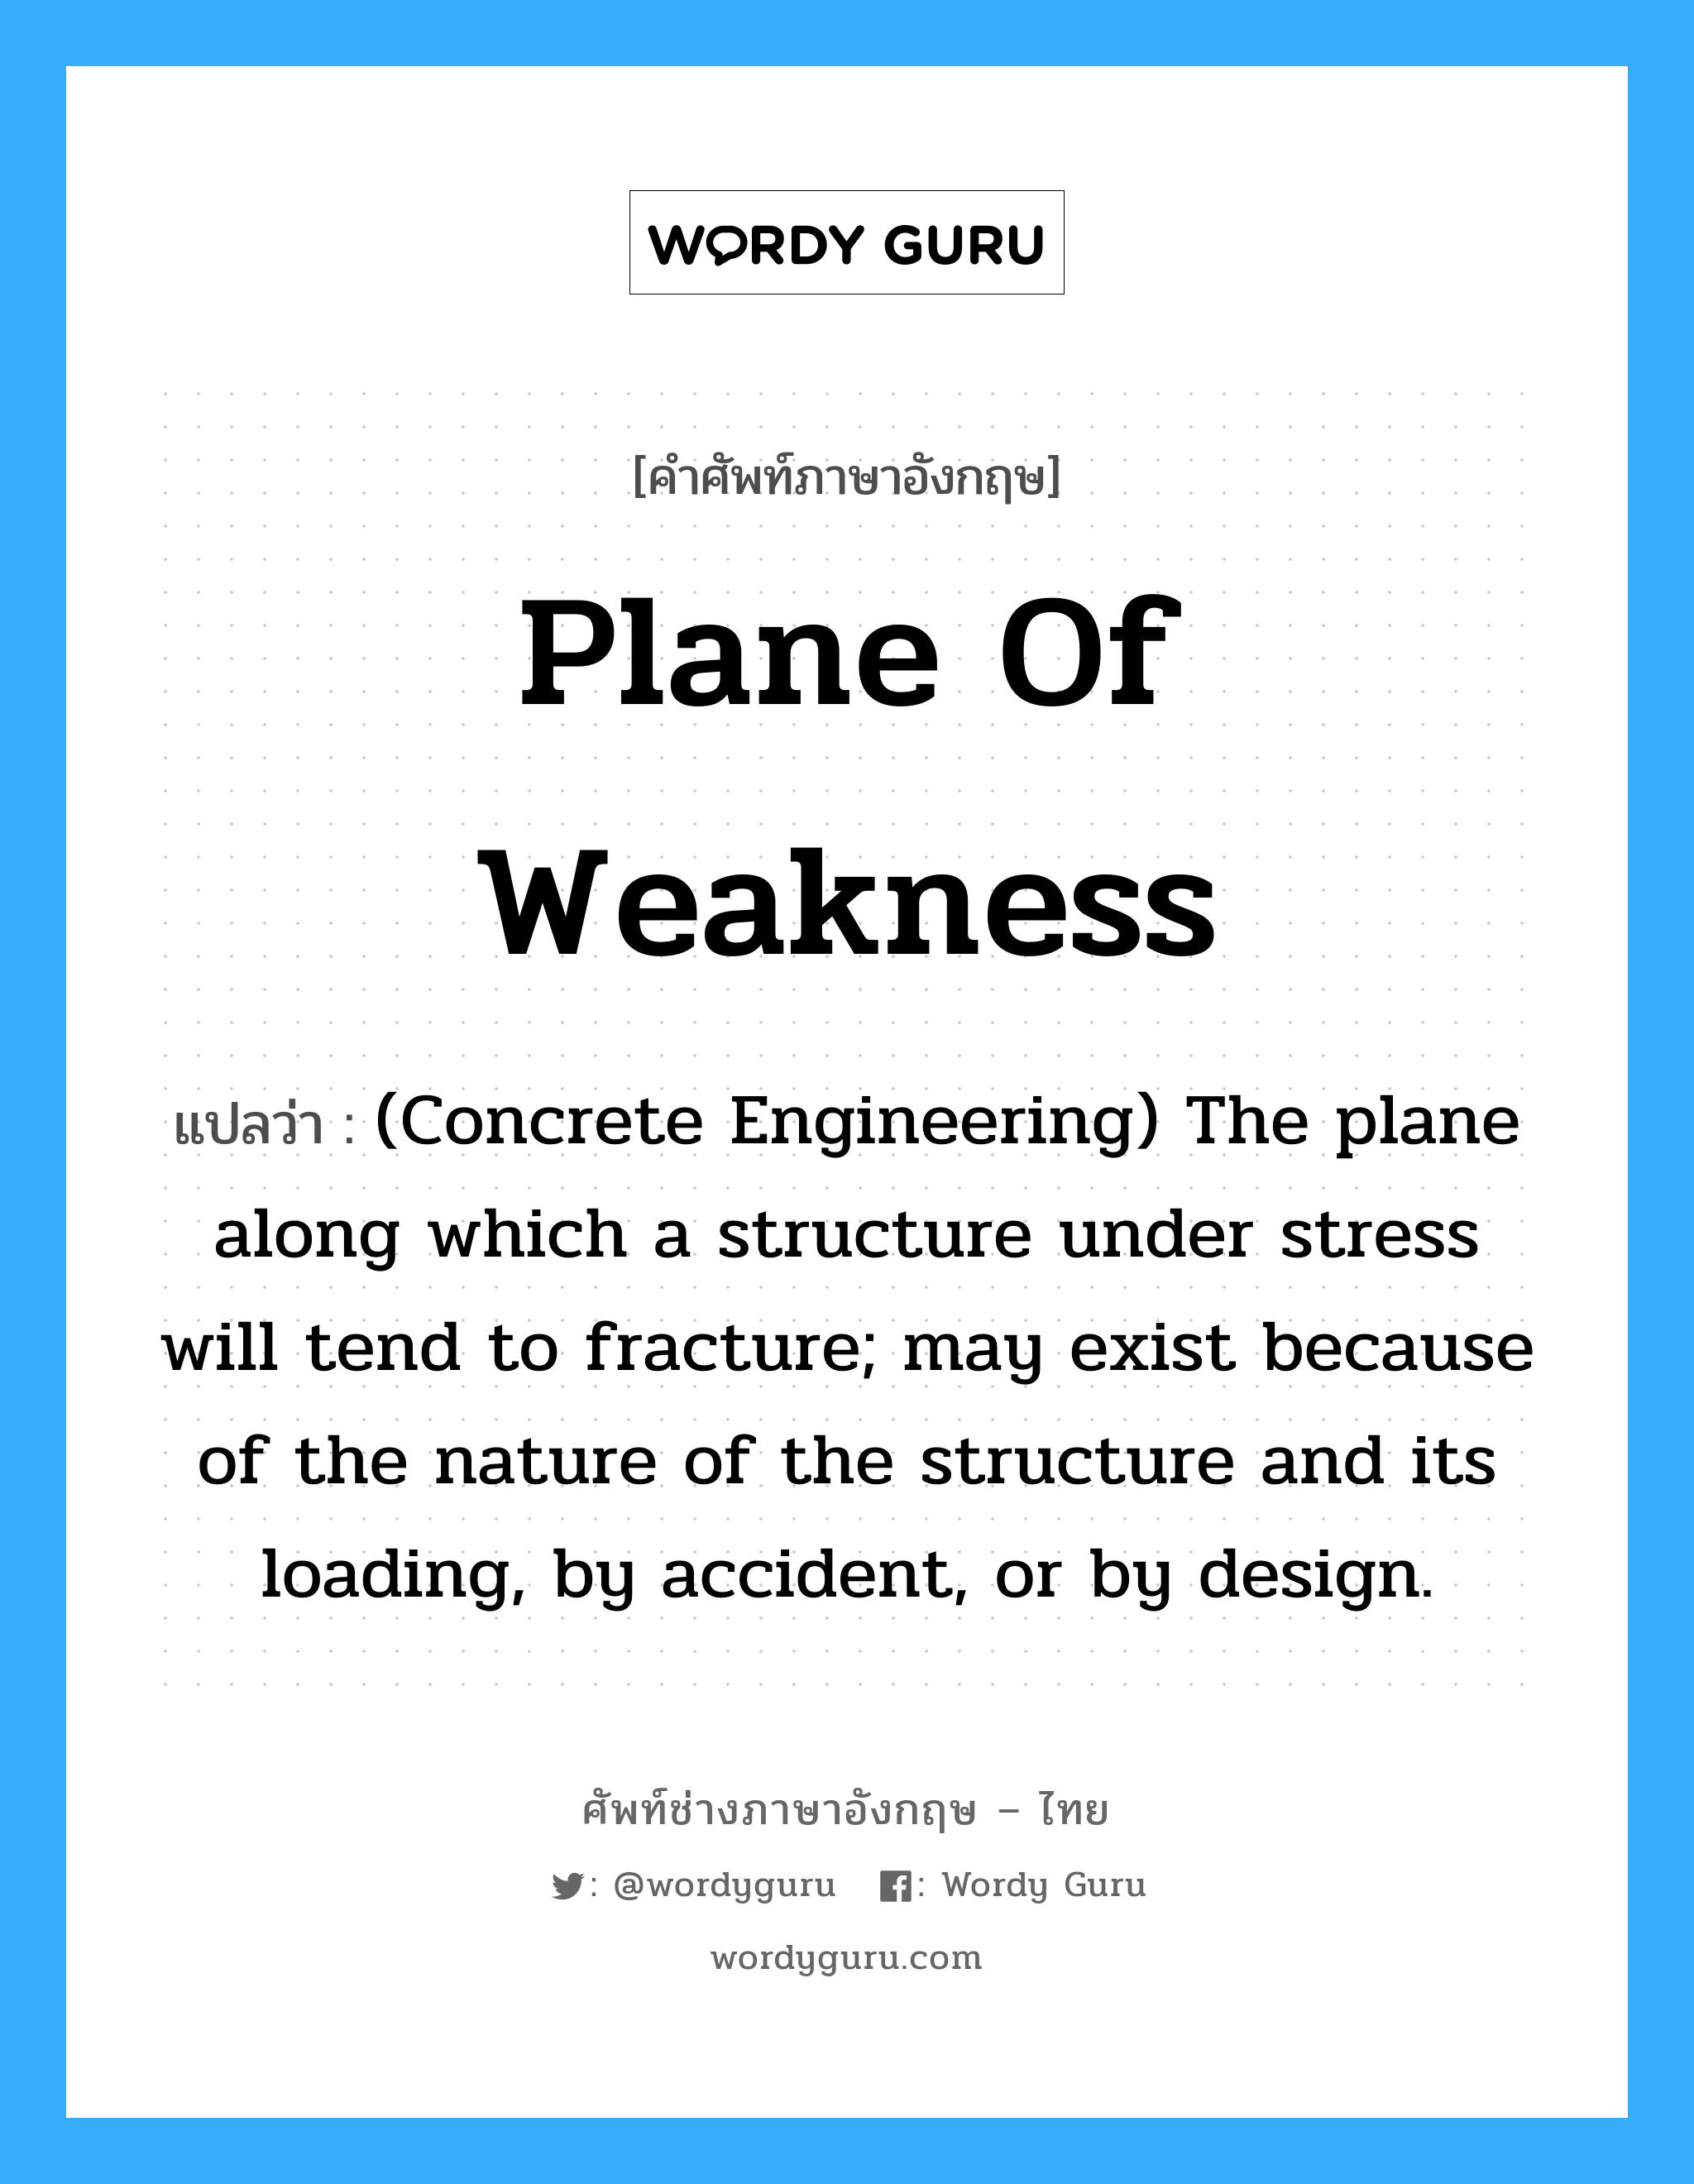 (Concrete Engineering) The plane along which a structure under stress will tend to fracture; may exist because of the nature of the structure and its loading, by accident, or by design. ภาษาอังกฤษ?, คำศัพท์ช่างภาษาอังกฤษ - ไทย (Concrete Engineering) The plane along which a structure under stress will tend to fracture; may exist because of the nature of the structure and its loading, by accident, or by design. คำศัพท์ภาษาอังกฤษ (Concrete Engineering) The plane along which a structure under stress will tend to fracture; may exist because of the nature of the structure and its loading, by accident, or by design. แปลว่า Plane of Weakness